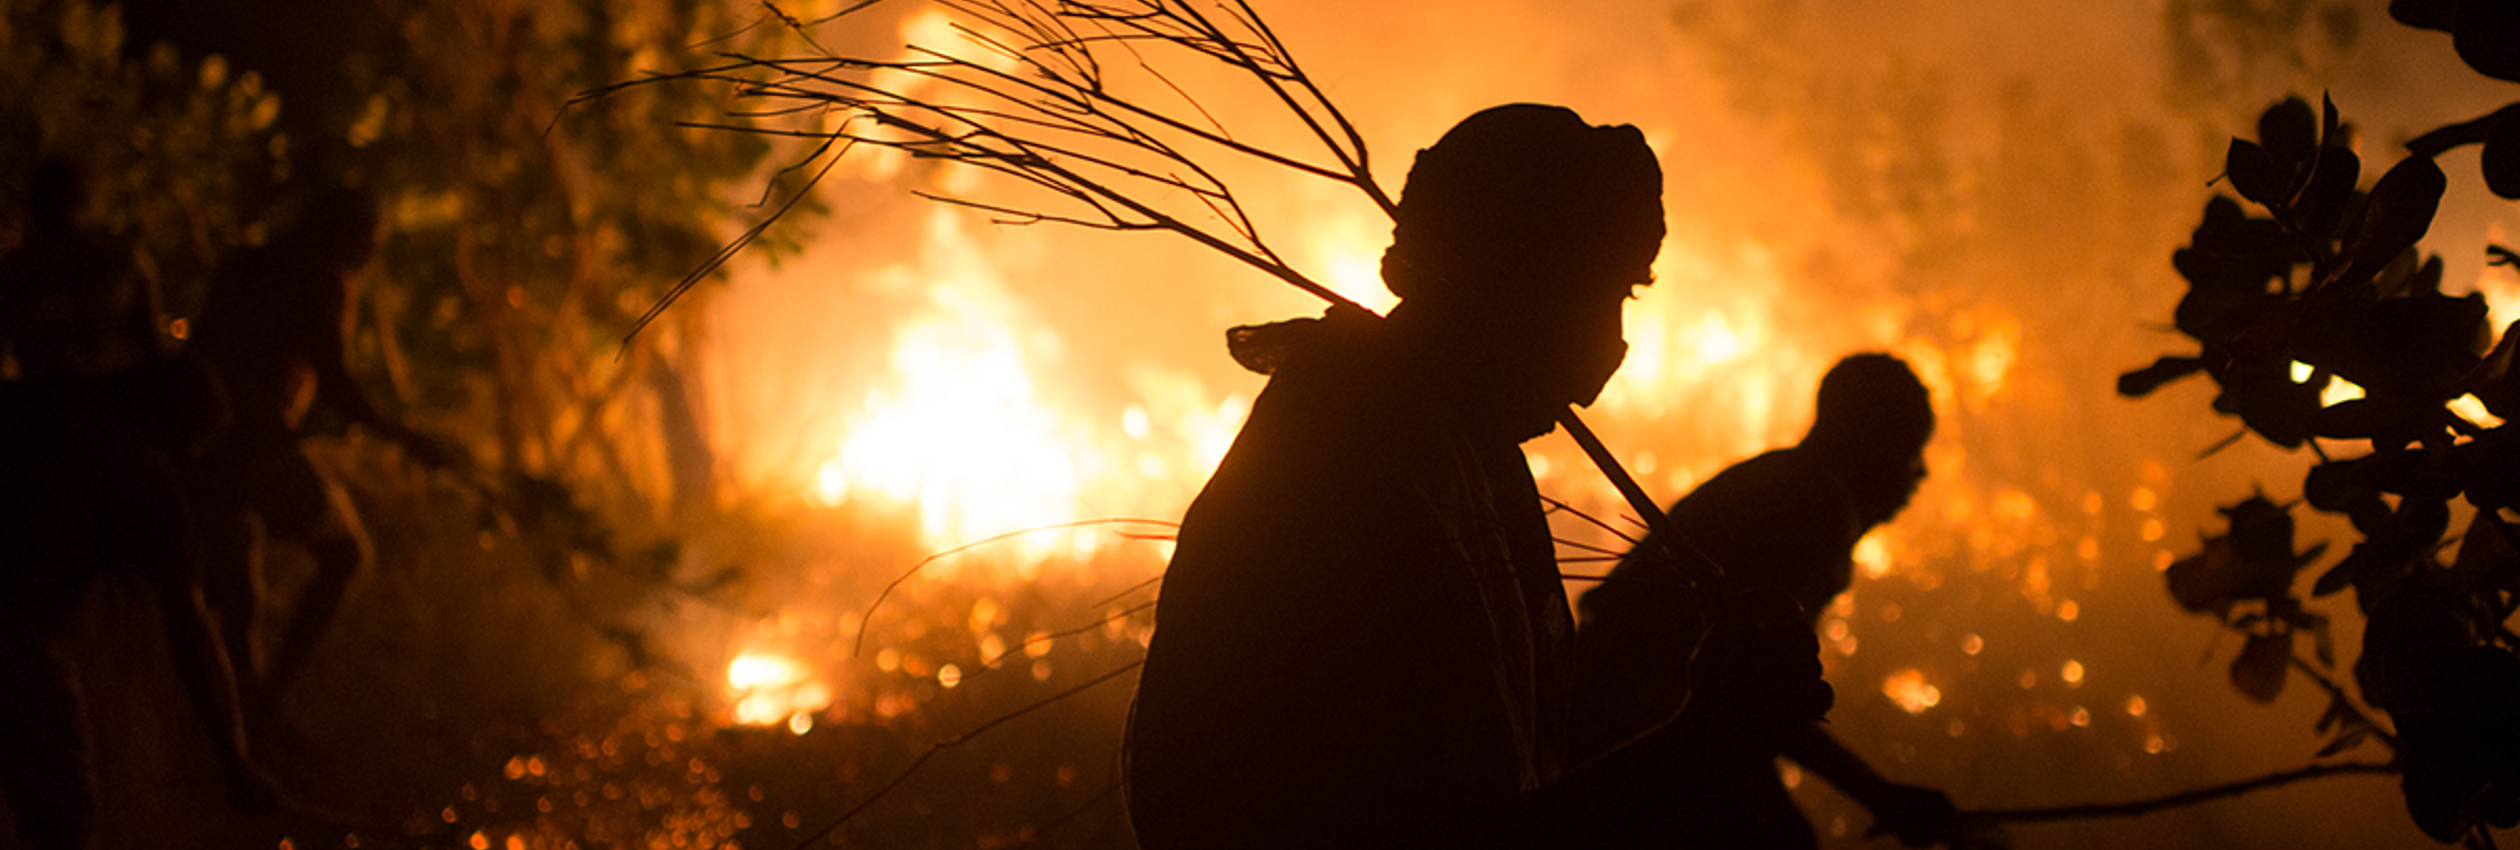 Members of the Refugee Fire Brigade use branches to beat out a large bushfire.  ©UNHCR/Colin Delfosse